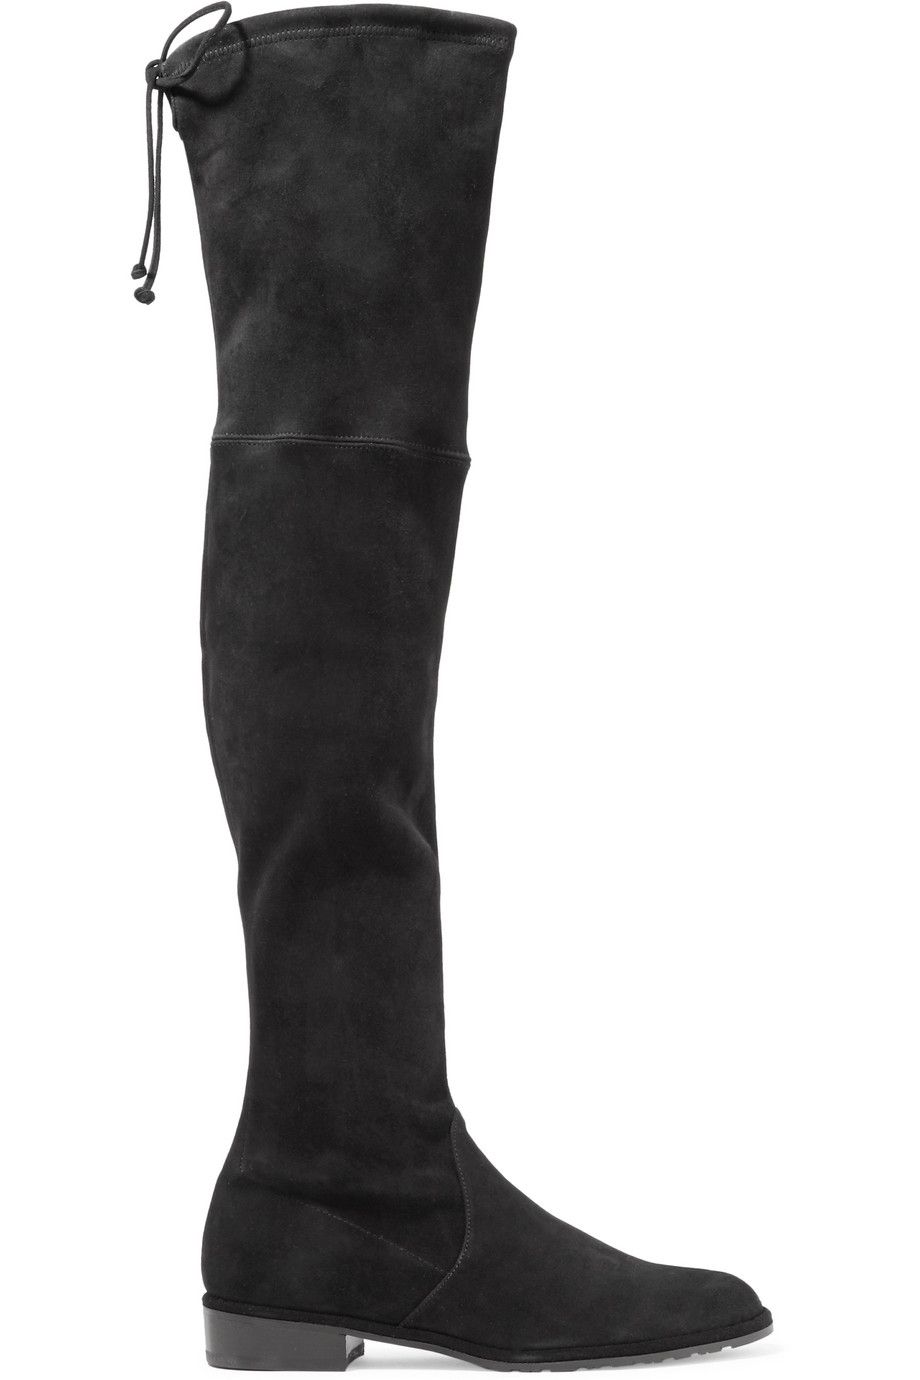 Footwear, Boot, Shoe, Knee-high boot, Leather, Riding boot, Brown, Suede, Durango boot, High heels, 